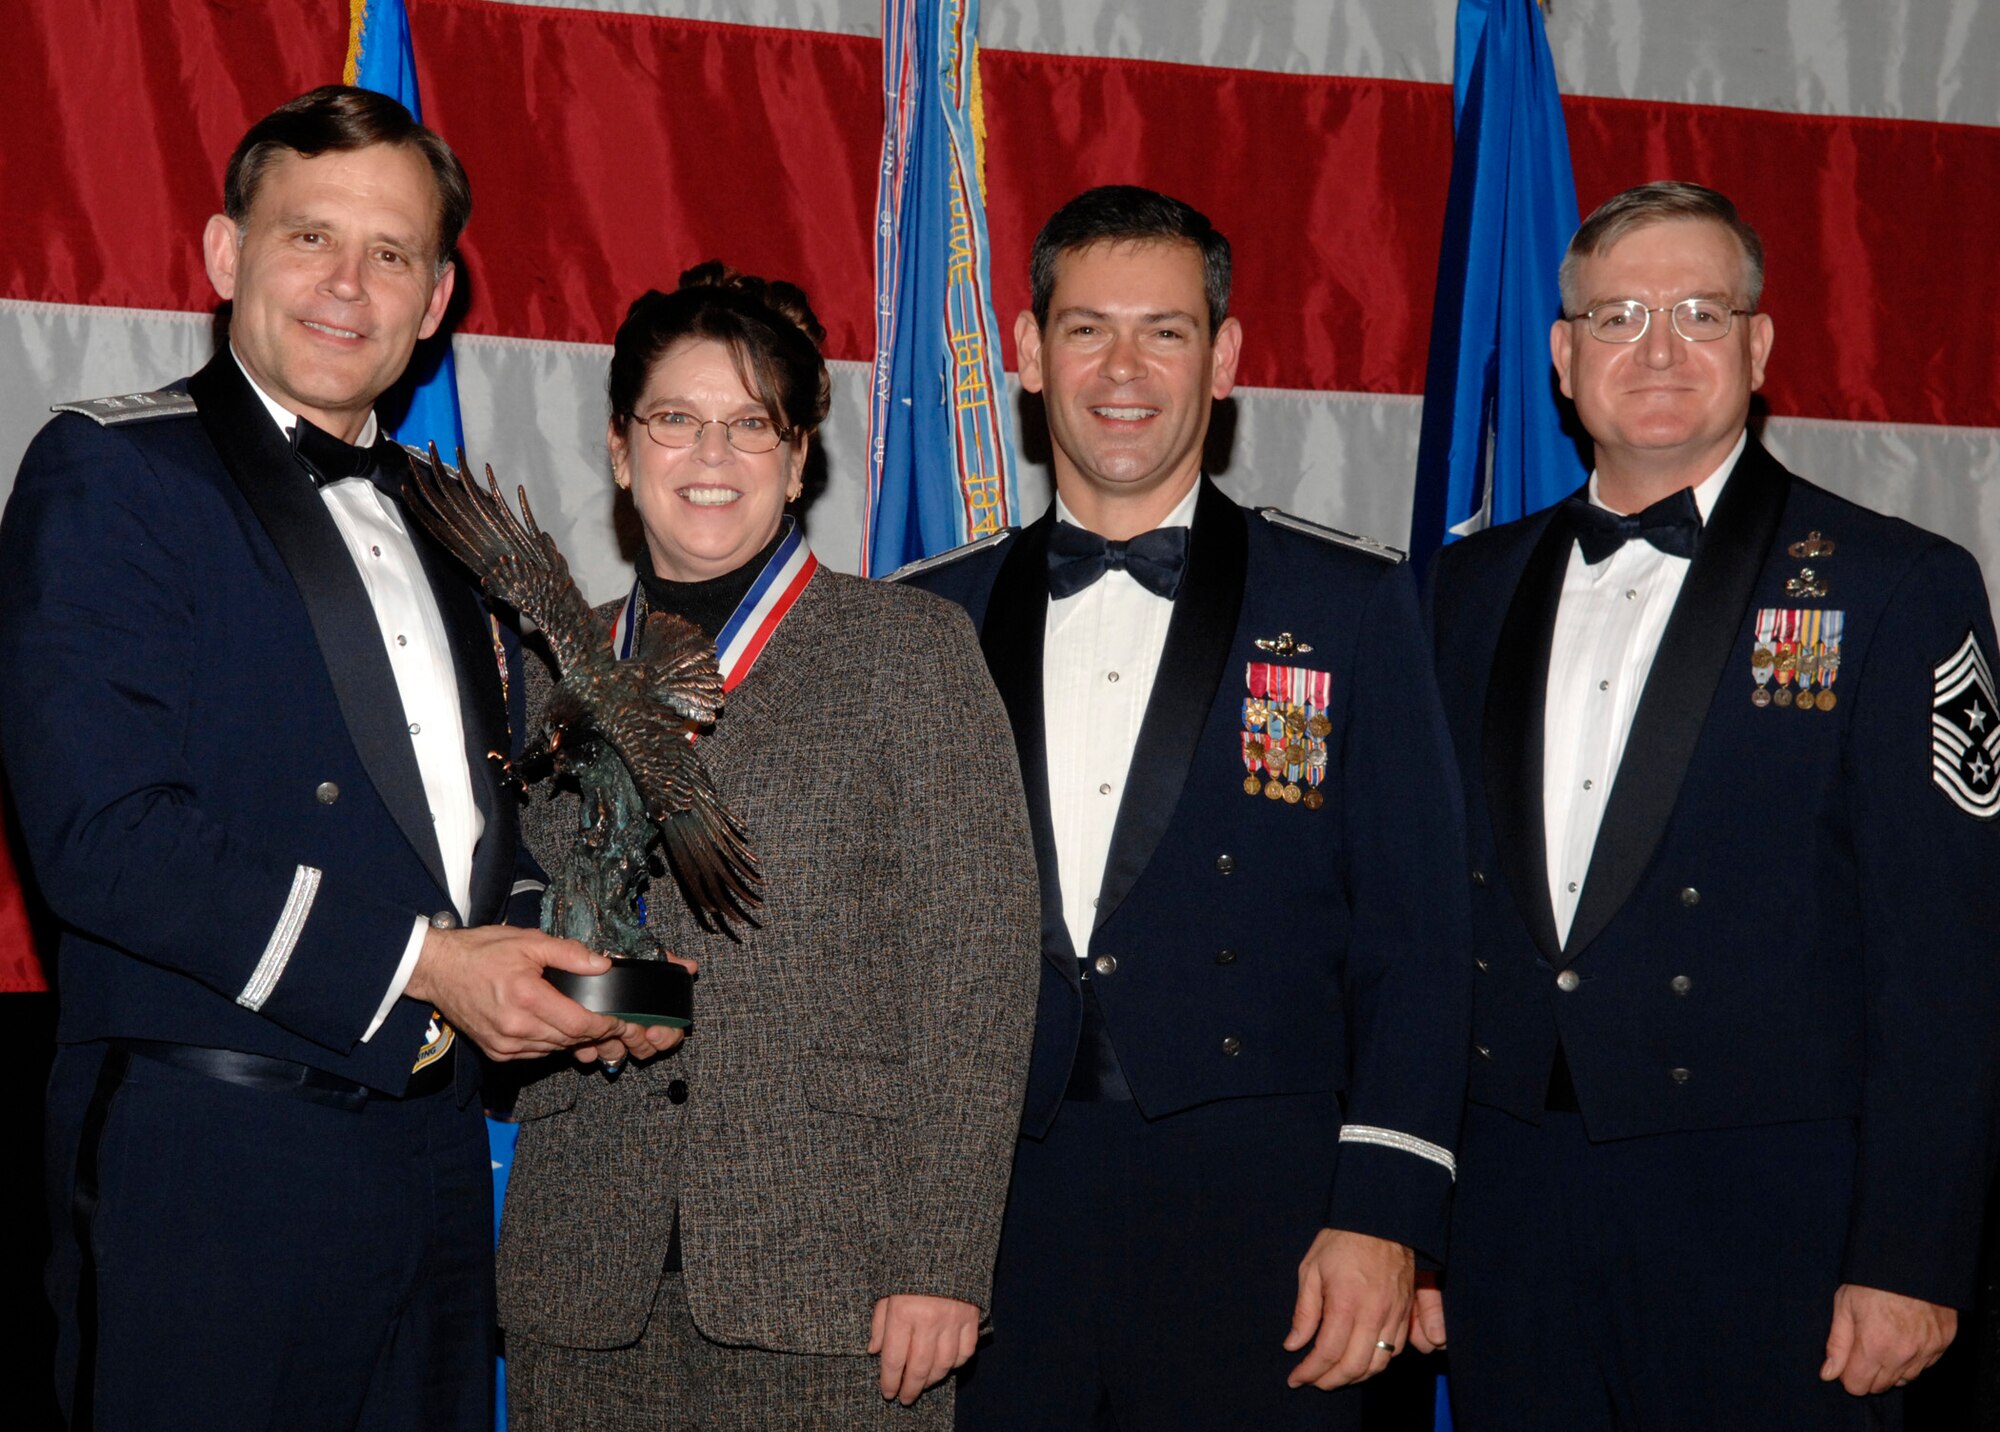 Phyllis Herald, 53d Test and Evaluation Group, won the 53d Wing Category 3 Civilian of the Year Award during the annual awards banquet Jan. 31 at the Emerald Coast Conference Center.  The night’s guest speaker and former 53d commander, Maj. Gen. (retired) Jack Catton (left) presented the awards. Col. Ken Wilsbach, 53d Wing commander, and Chief Master Sgt. Randy Salefske, 53d Wing command chief, also stand with the winner.  U.S. Air Force photo.